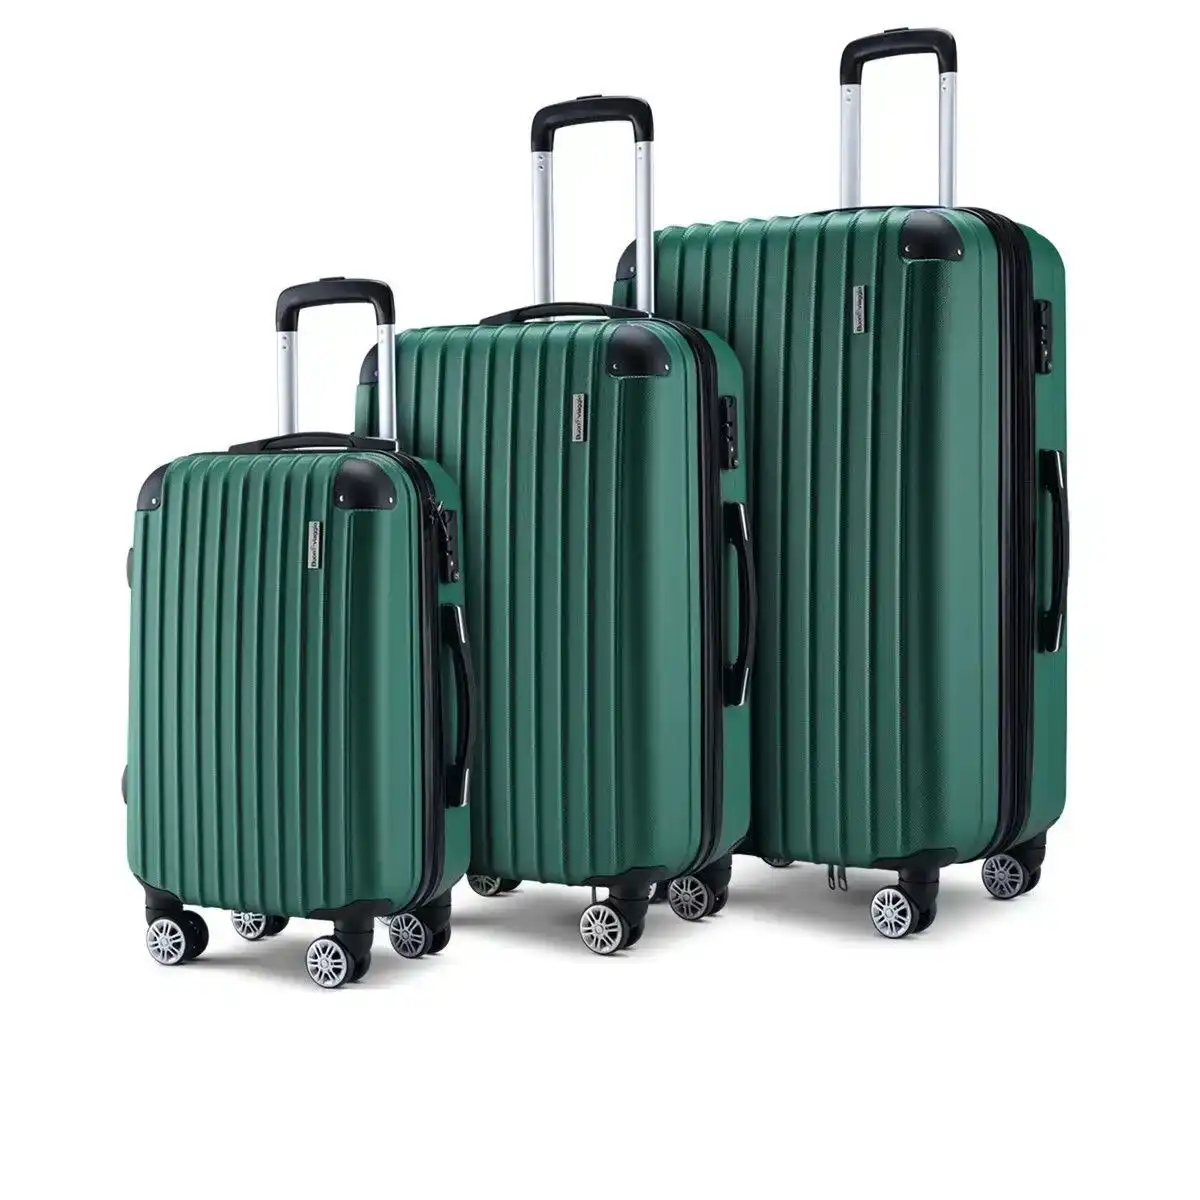 Buon Viaggio 3 Piece Luggage Set Carry On Suitcases Travel Cabin Bags Hard Shell Case with Wheels Lightweight Rolling Trolley TSA Lock 2 Covers Green